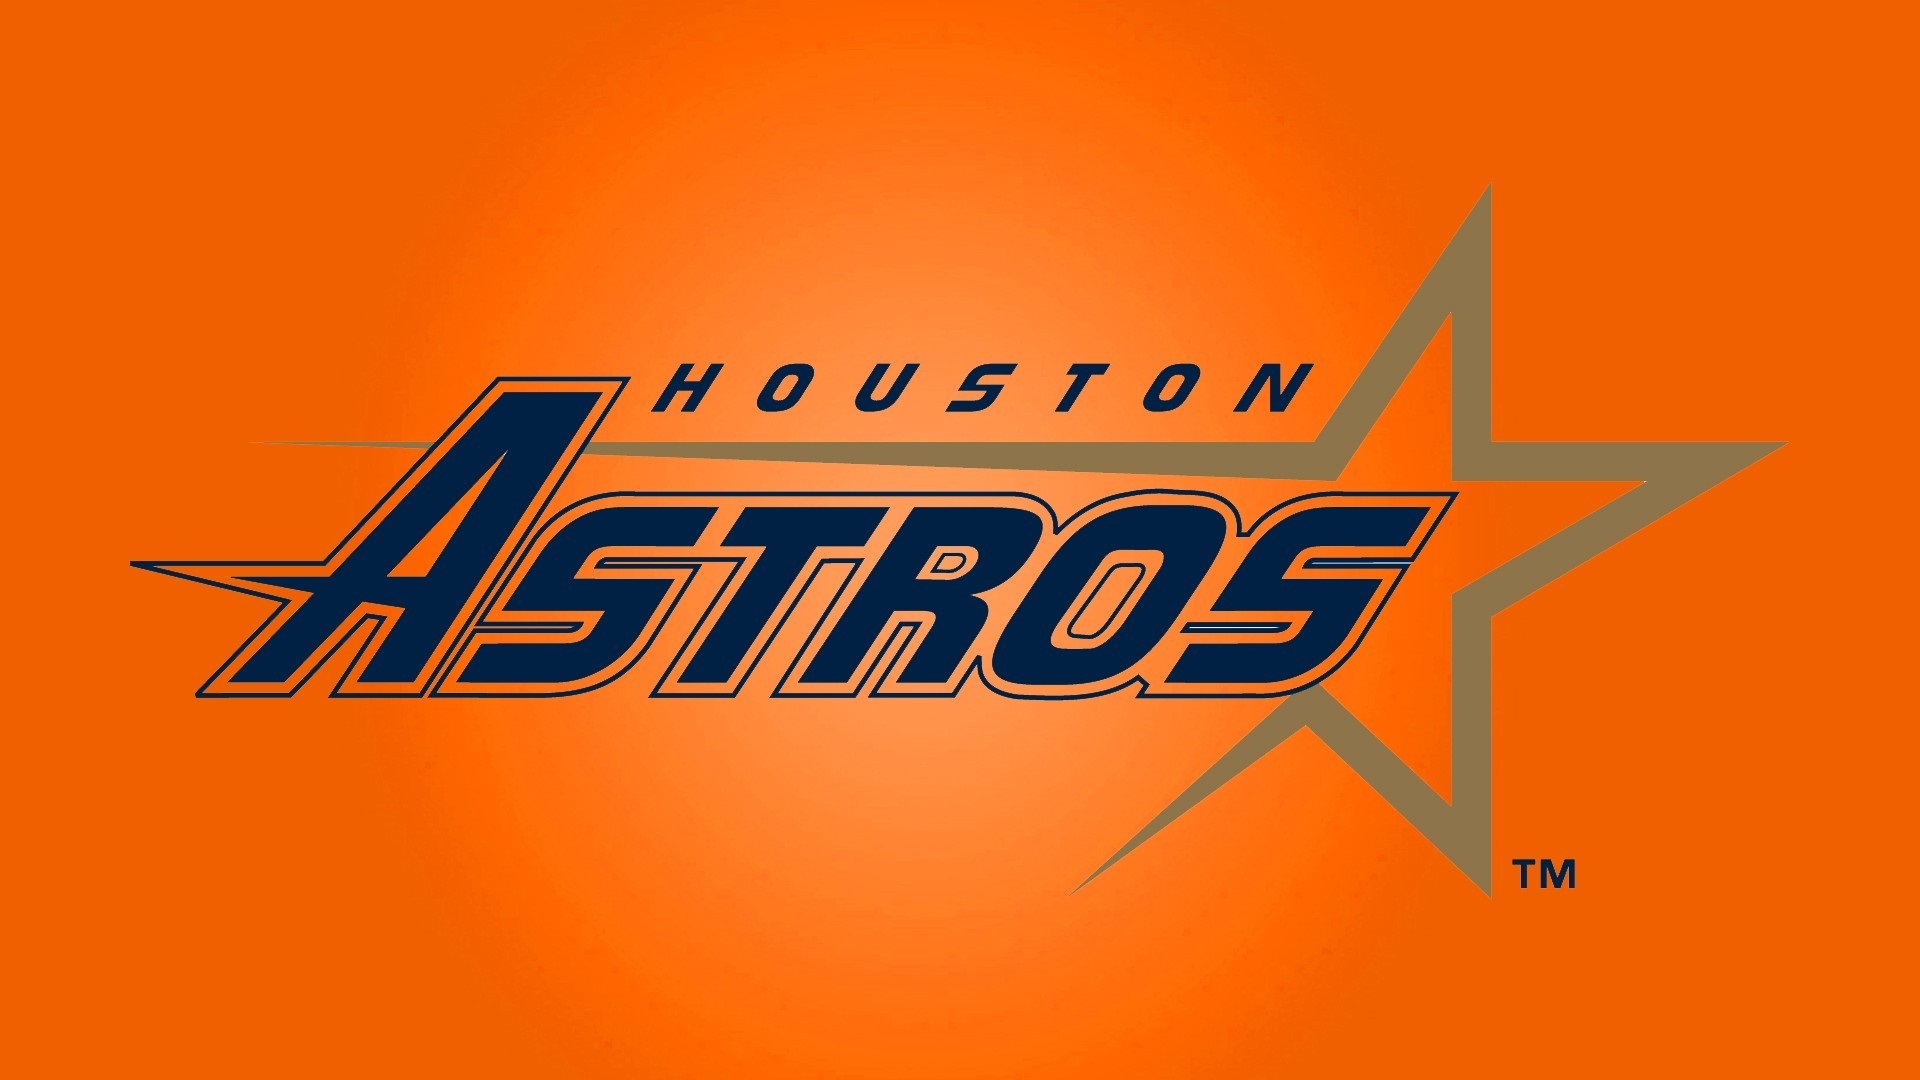 Houston Astros Laptop Wallpaper with high-resolution 1920x1080 pixel. You can use this wallpaper for Mac Desktop Wallpaper, Laptop Screensavers, Android Wallpapers, Tablet or iPhone Home Screen and another mobile phone device